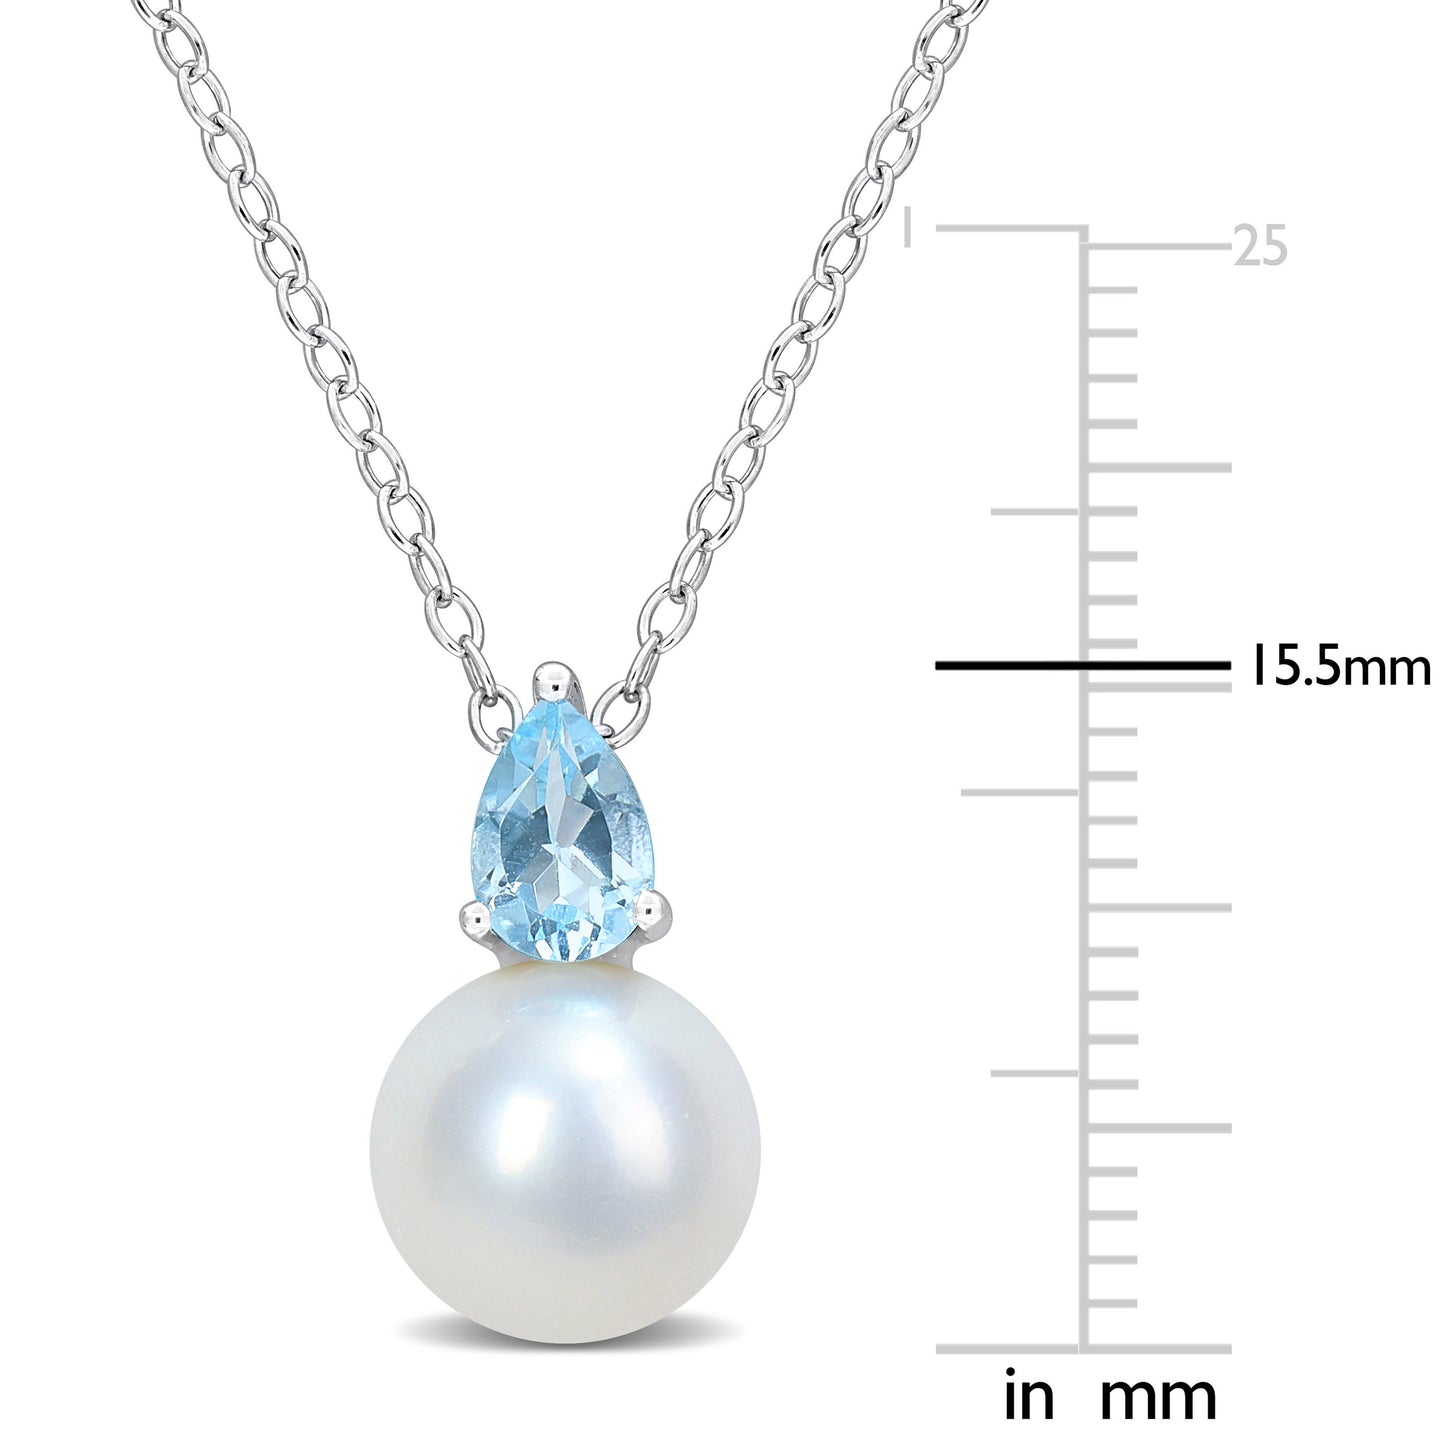 1/2 CT TGW Blue Topaz - Sky And 8.5 - 9 MM White Freshwater Cultured Pearl Fashion Pendant With Chain Silver